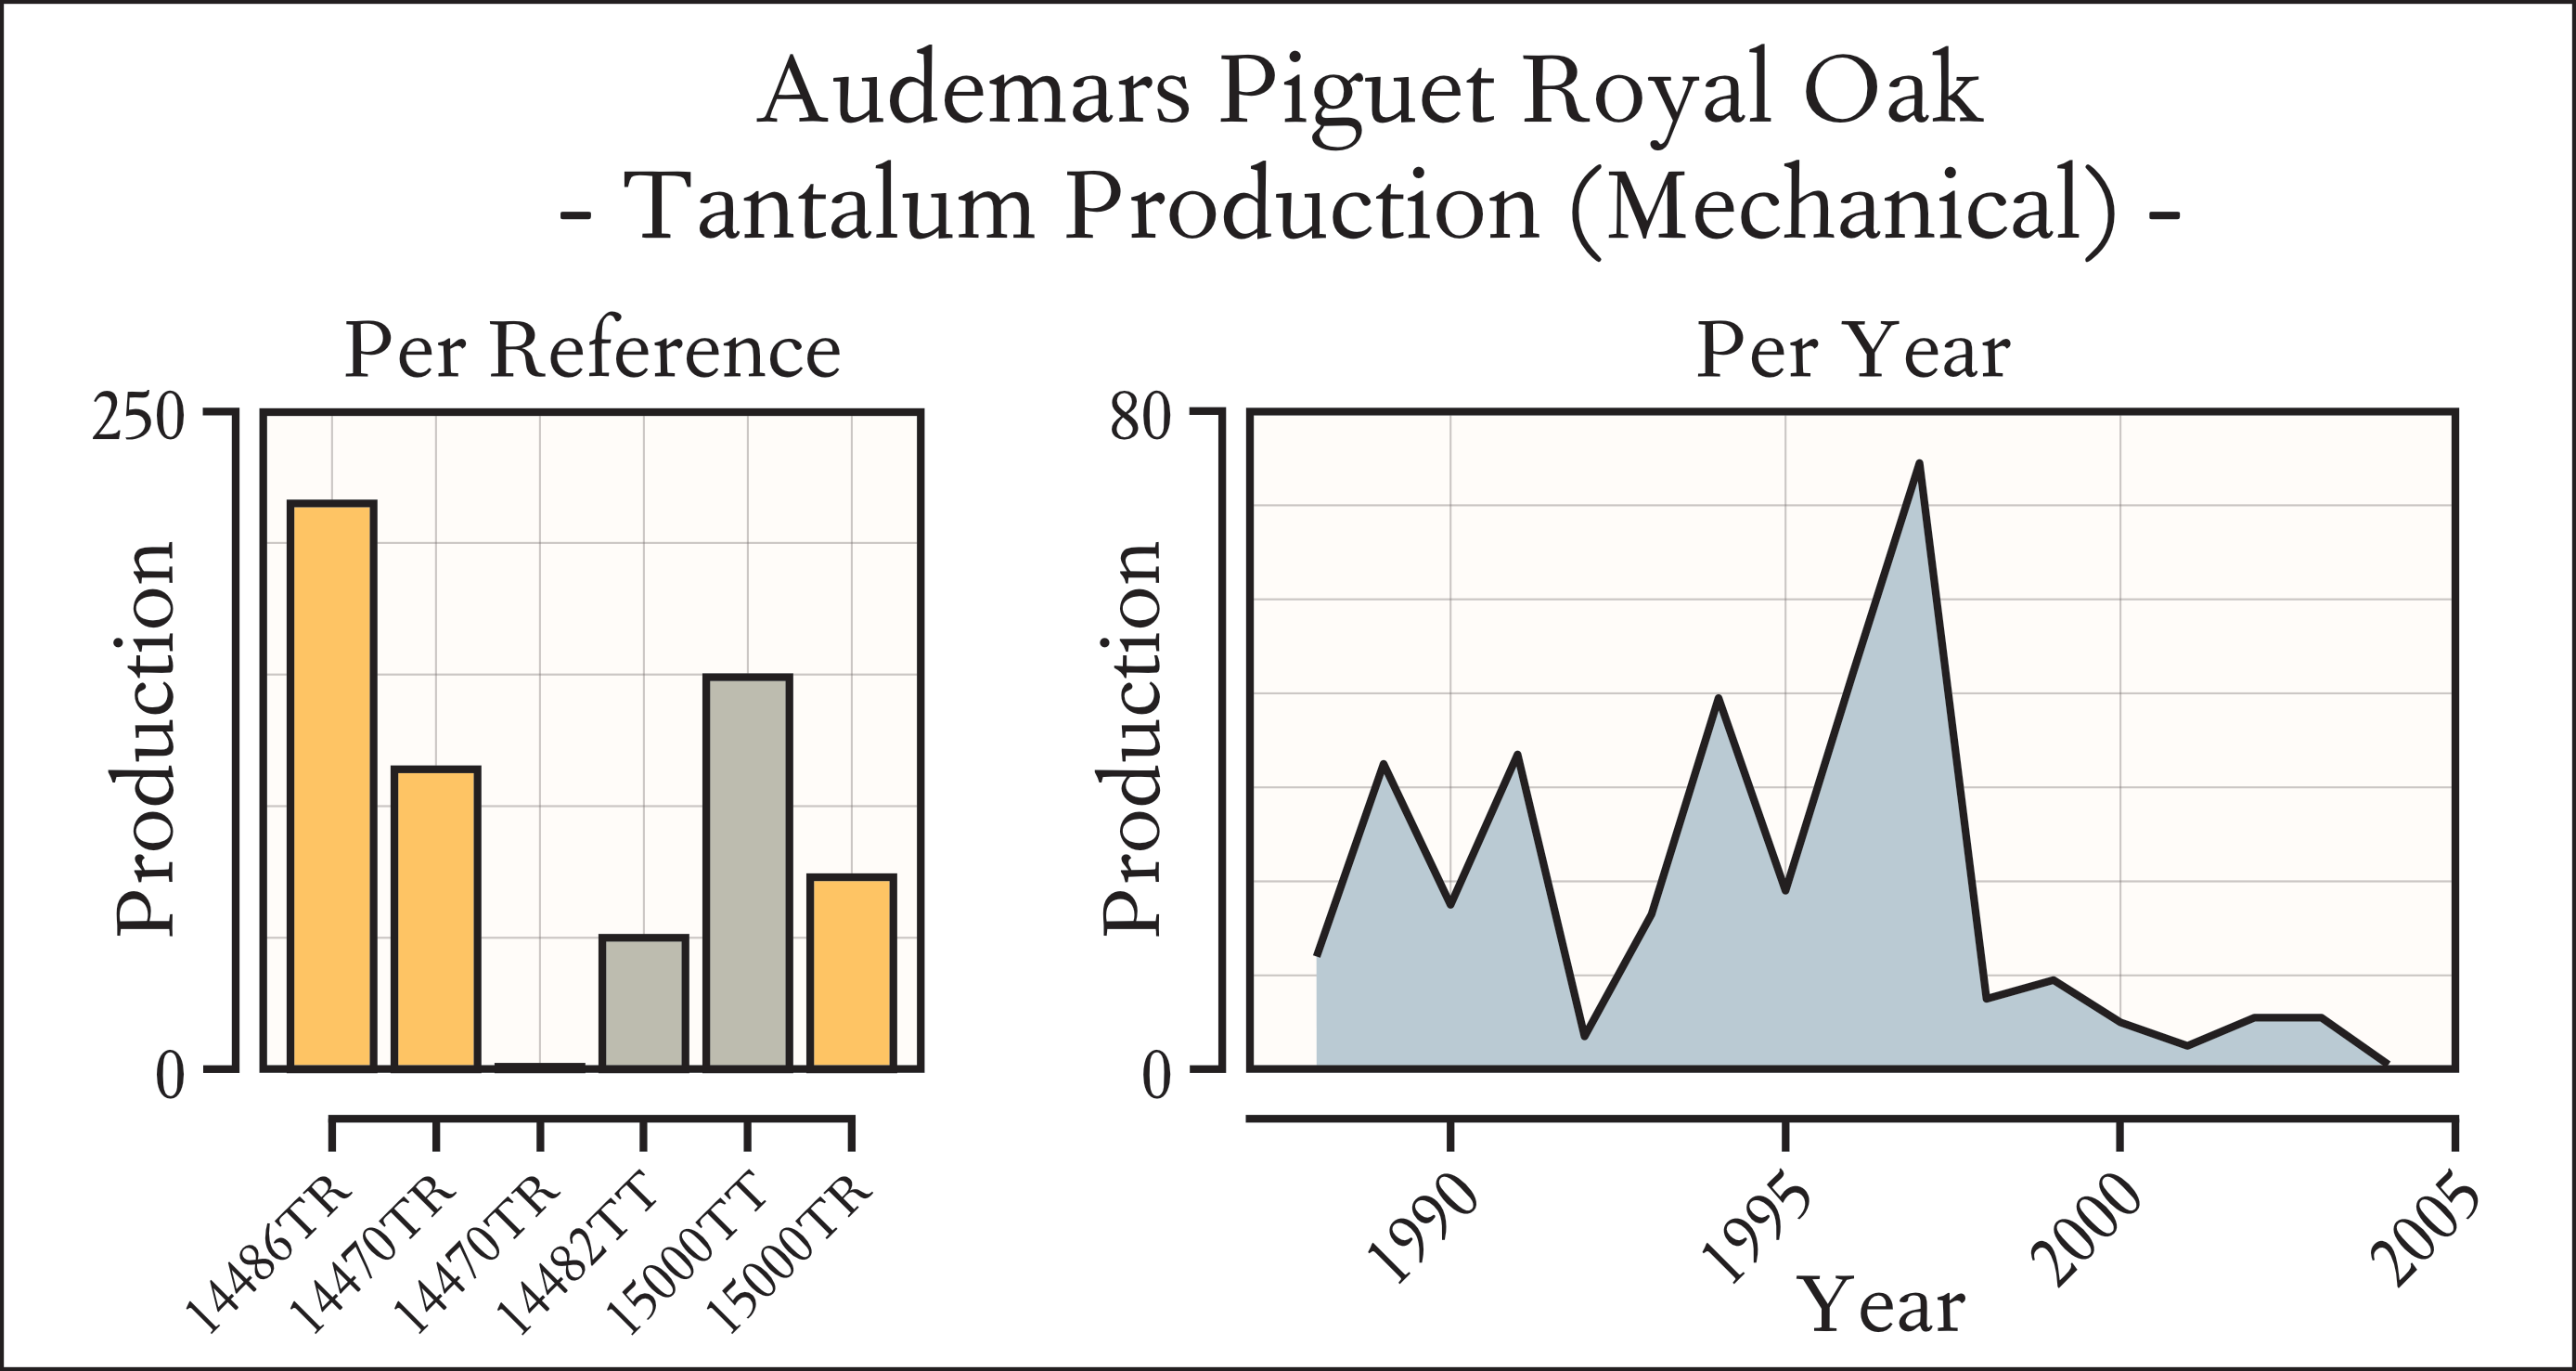 Production numbers of Mechanical Audemars Piguet Royal Oak references with Tantalum cases